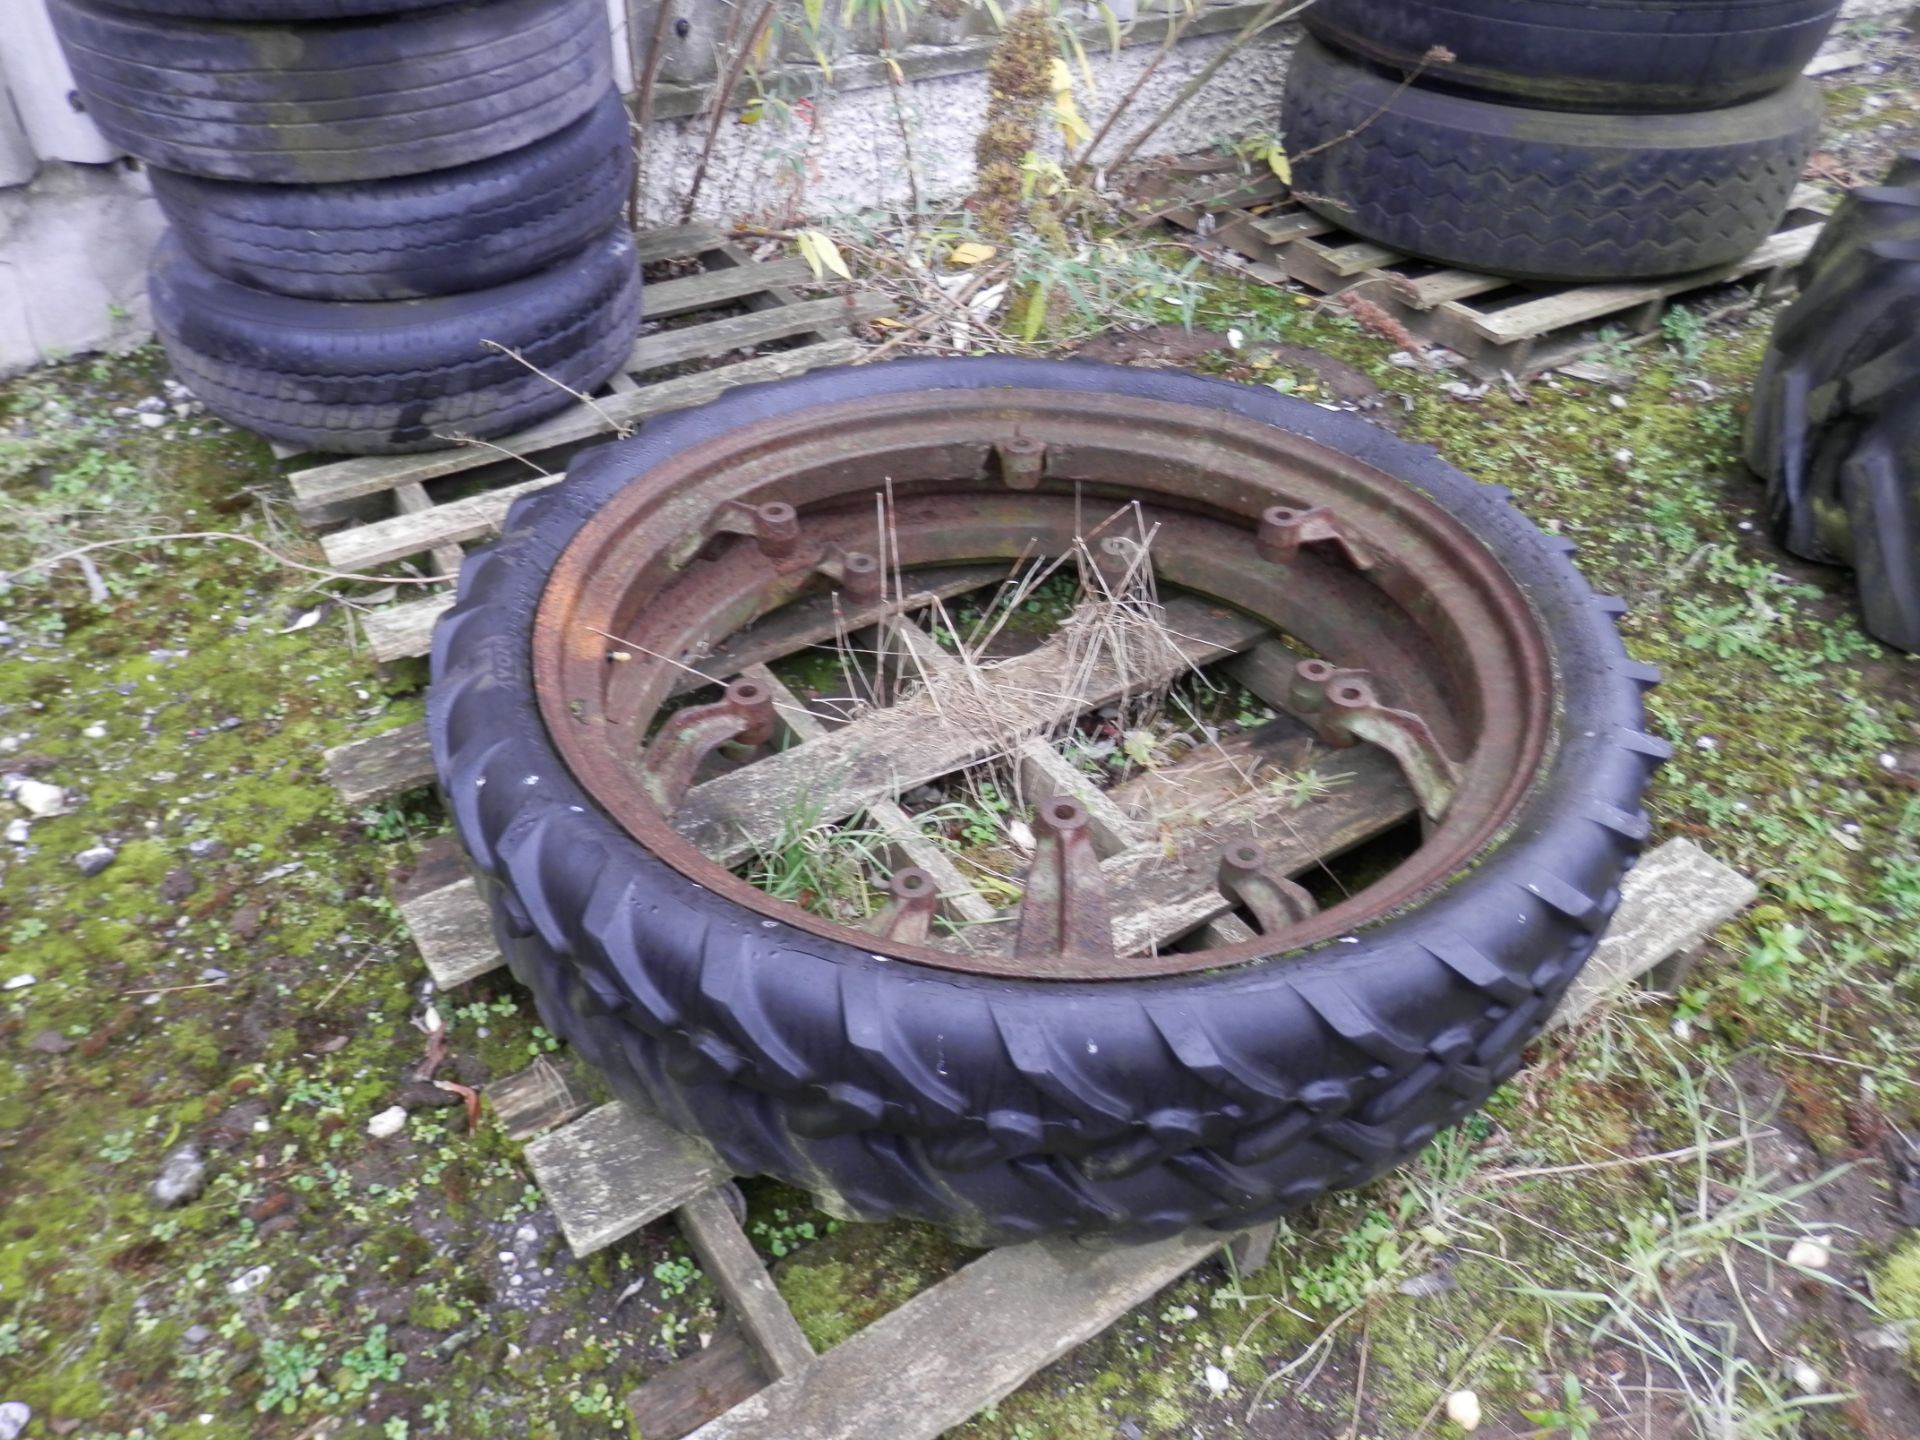 85 + ASSORTED LORRY, CAR & TRAILER TYRES & WHEELS, AS PICTURED. BUYER TO COLLECT COMPLETE JOBLOT. - Image 4 of 10